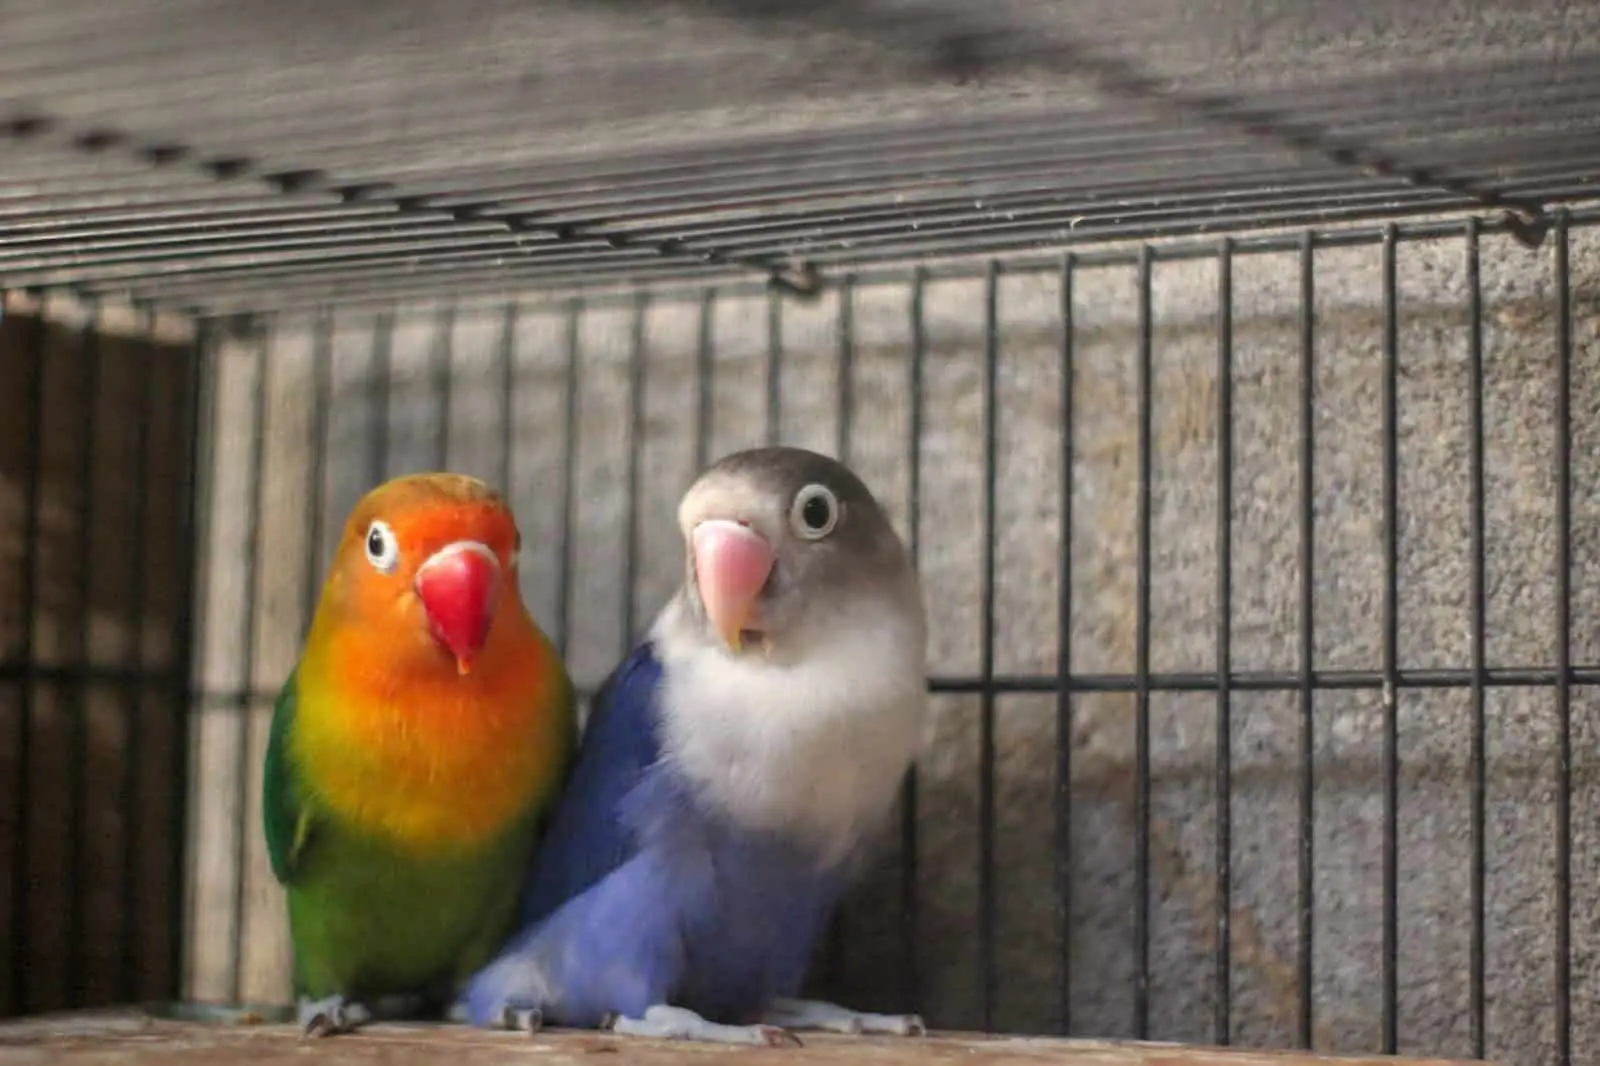 The US Lovebird Price Guide For 2023 at Petrestart.com.